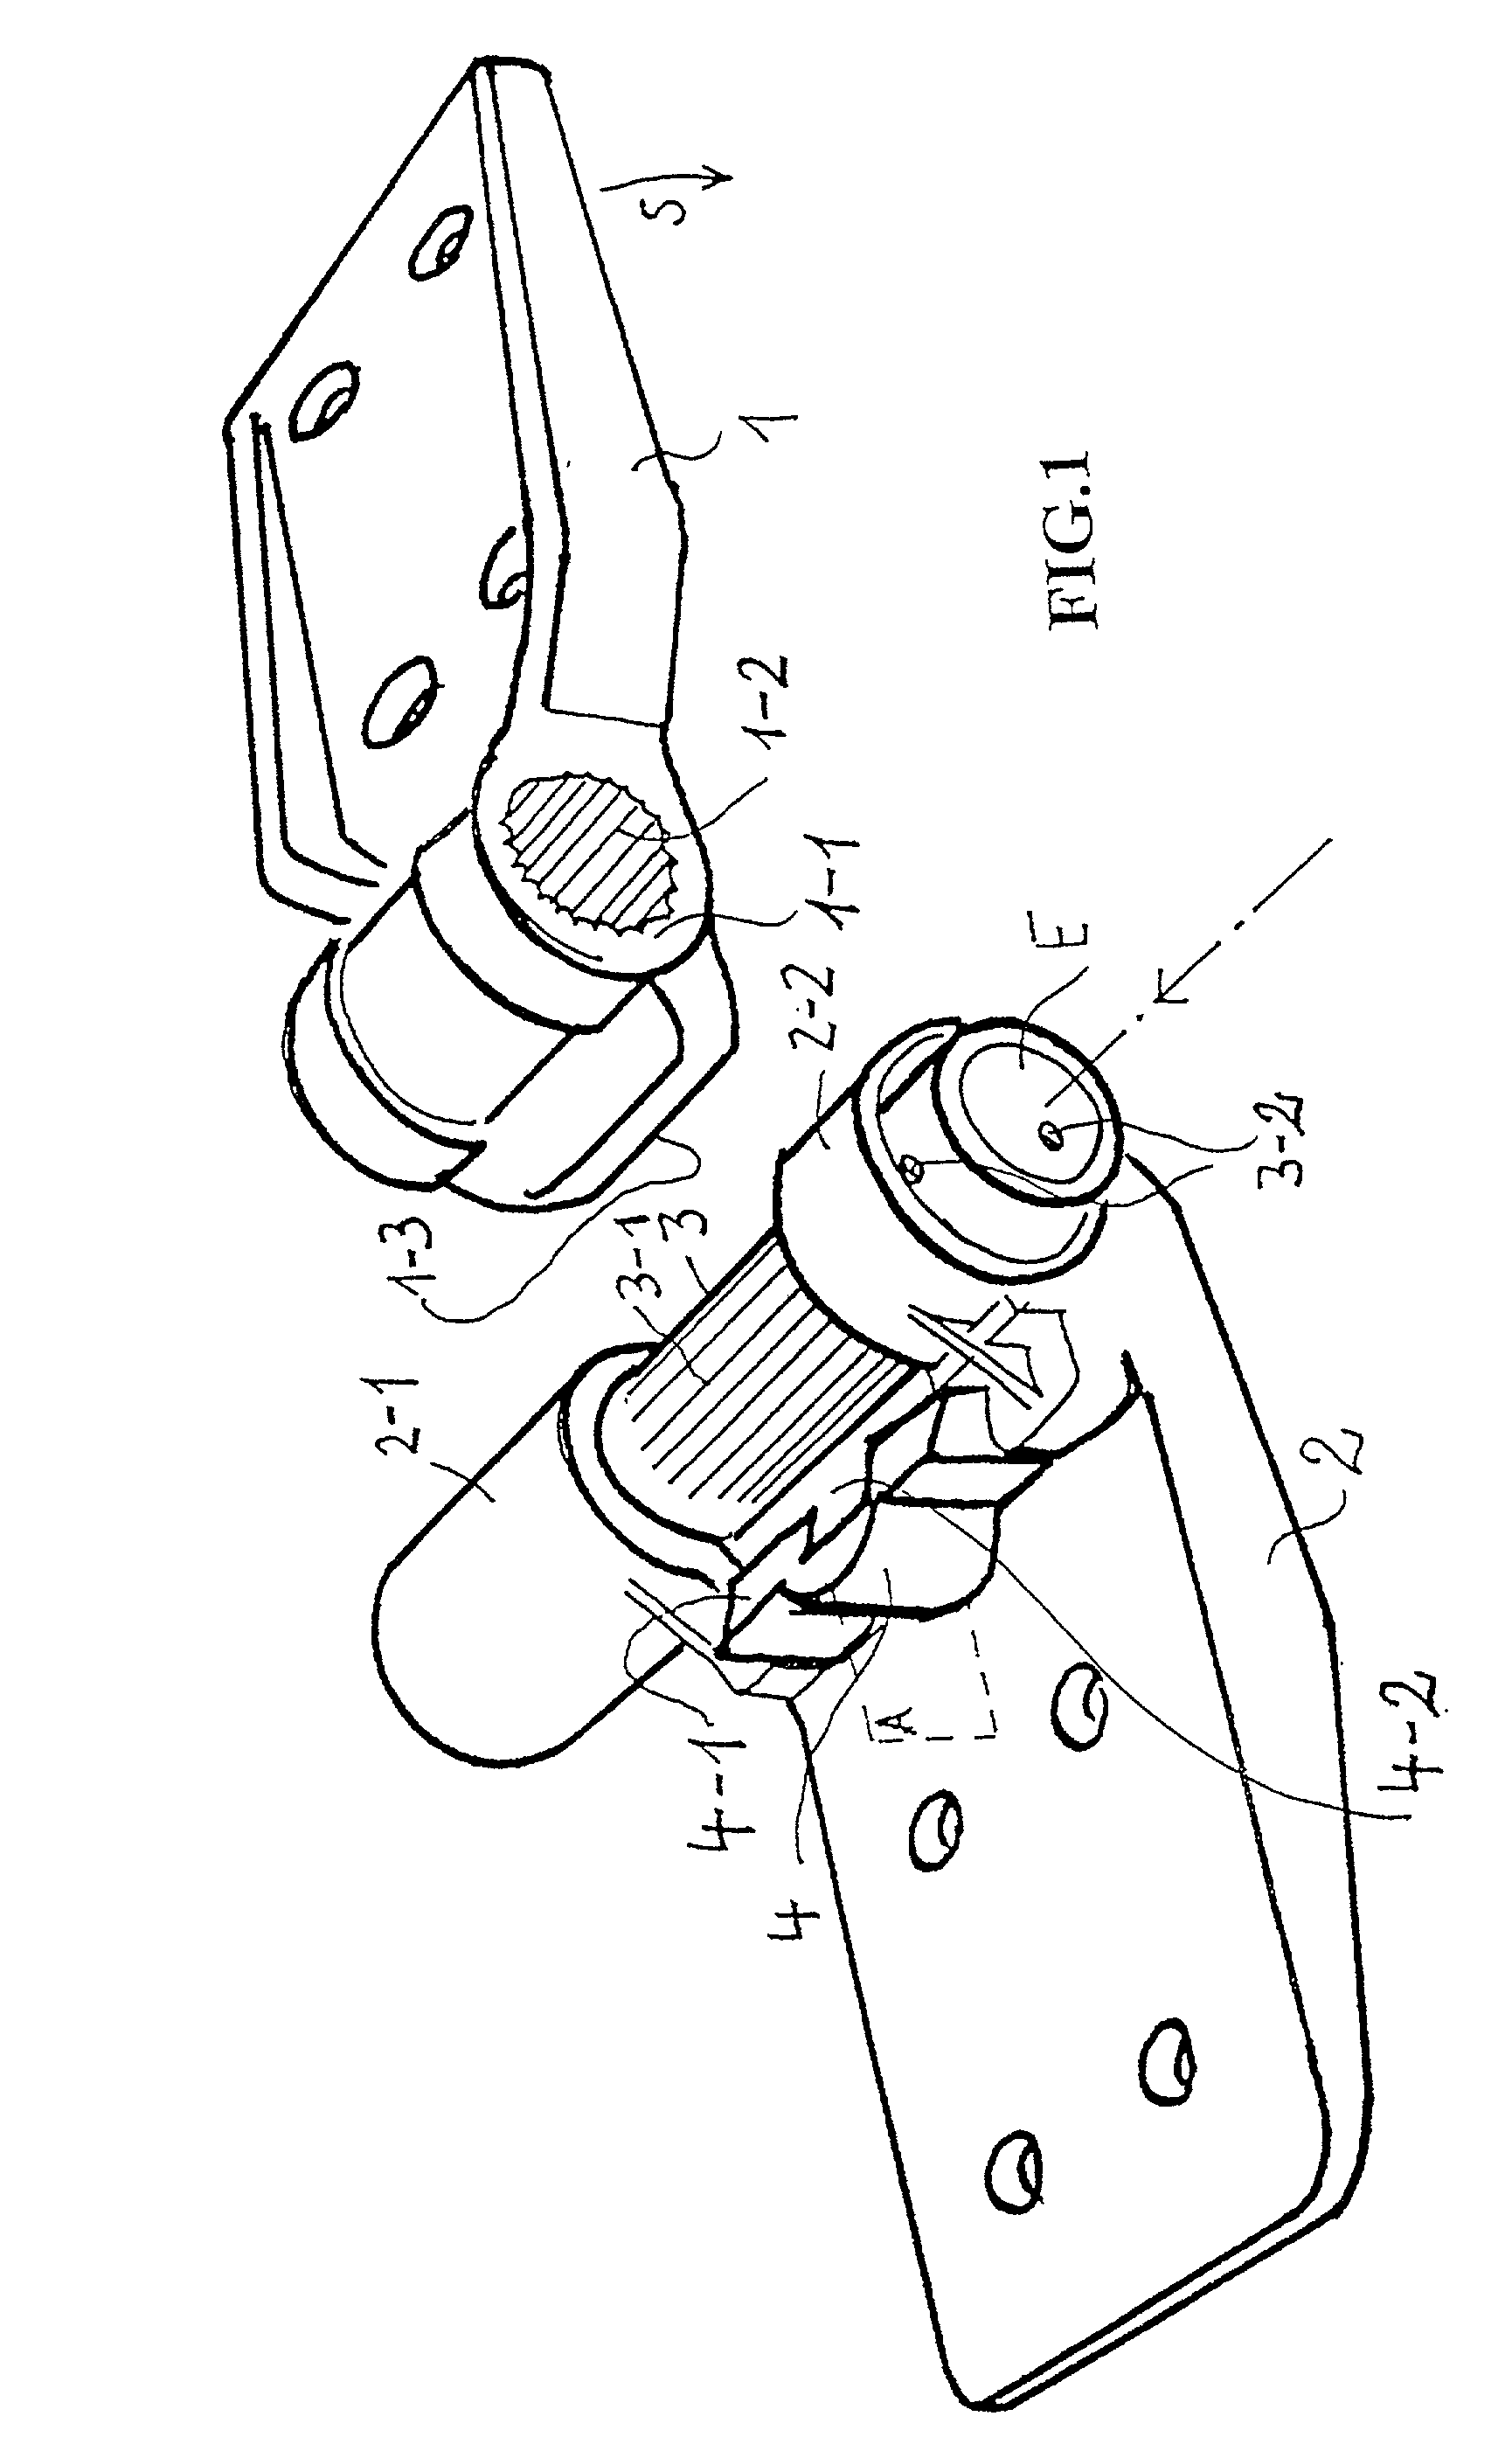 Spring-loaded hinge and damping arrangement, specifically for a spring-loaded hinge